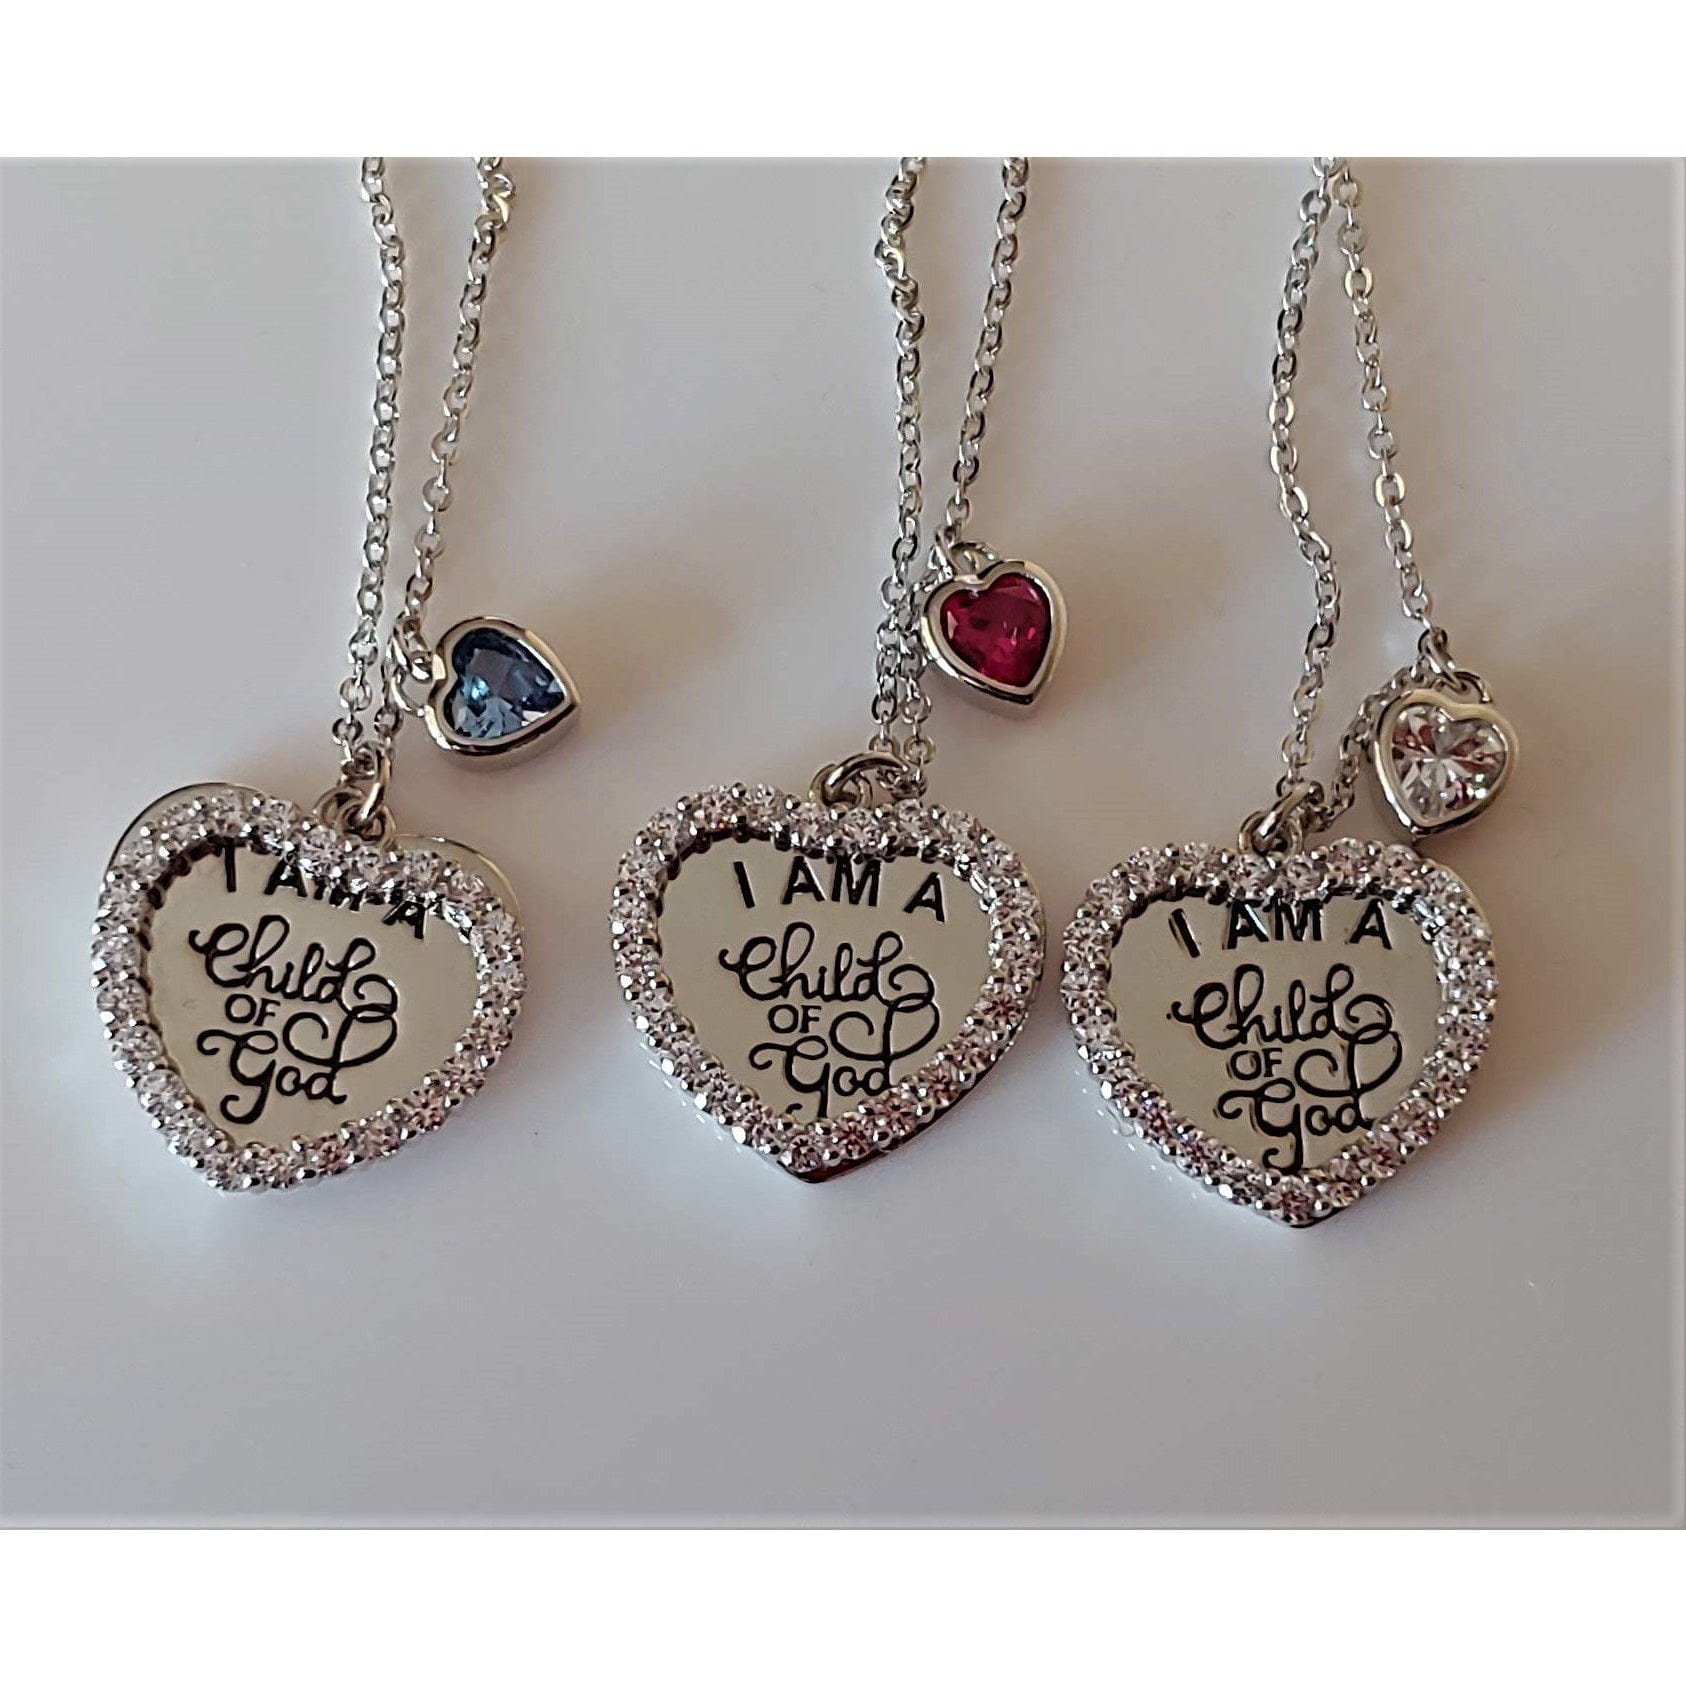 I AM A CHILD OF GOD Sterling Silver Inspirational Necklace! Only $59.95! - The Pink Pigs, A Compassionate Boutique